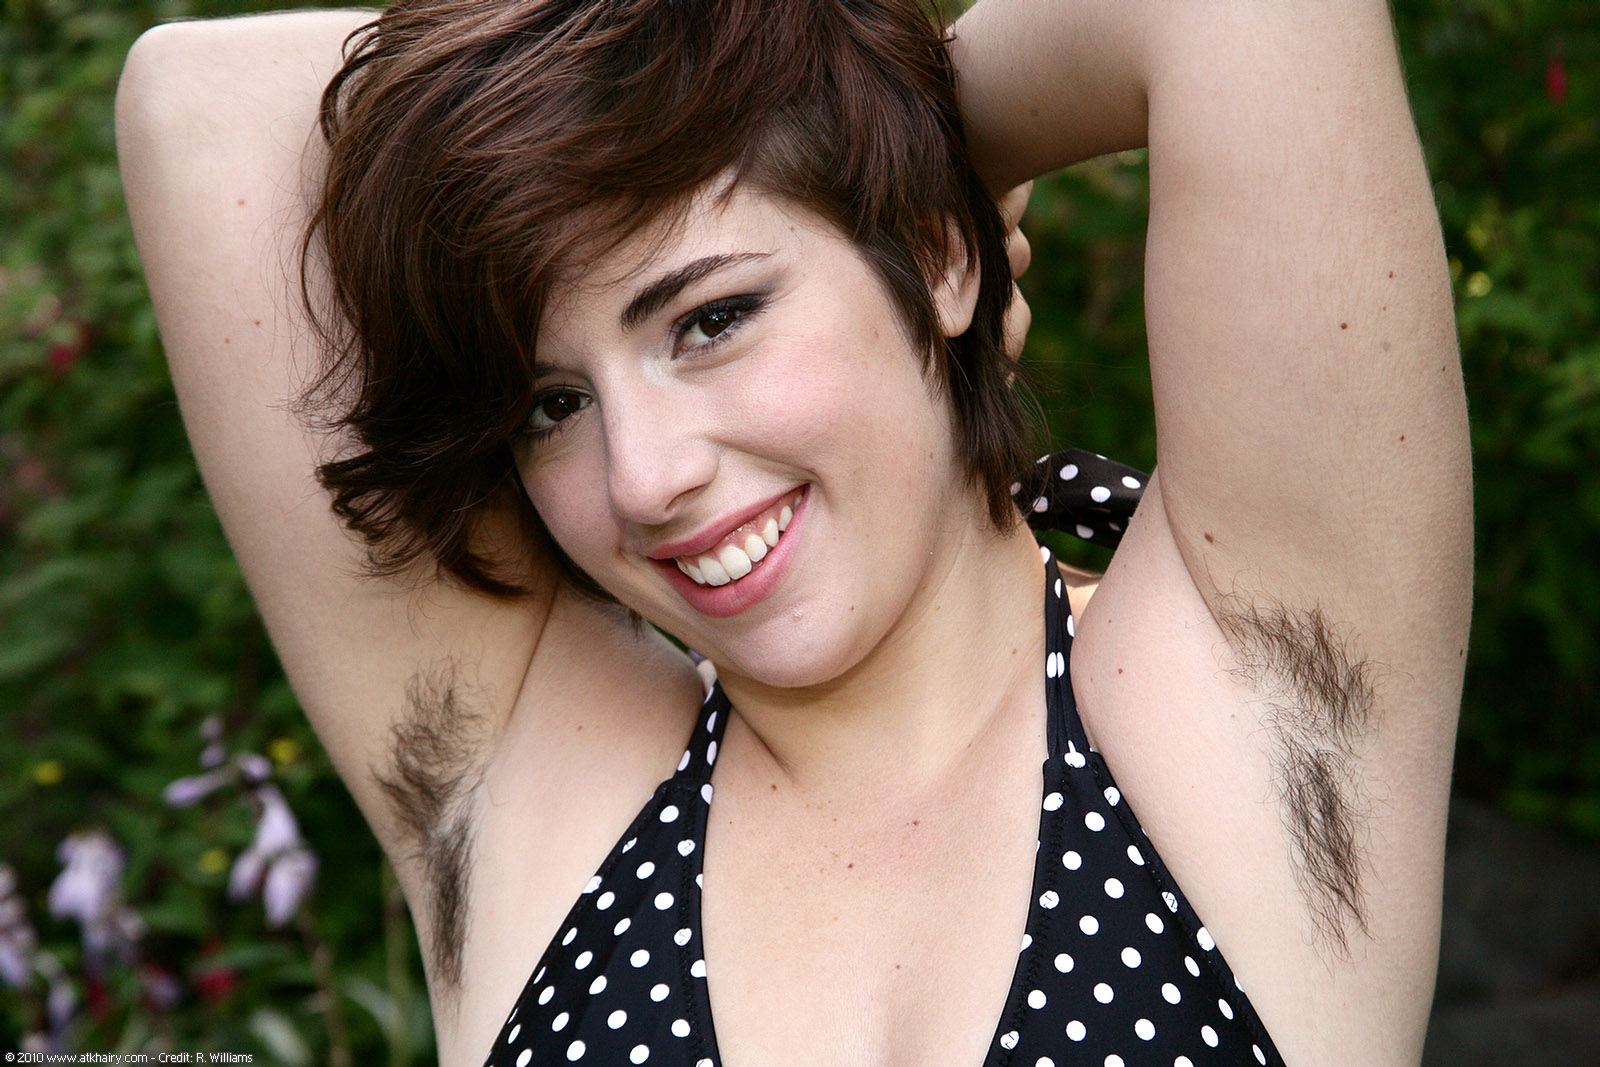 Simone from ATK Hairy.